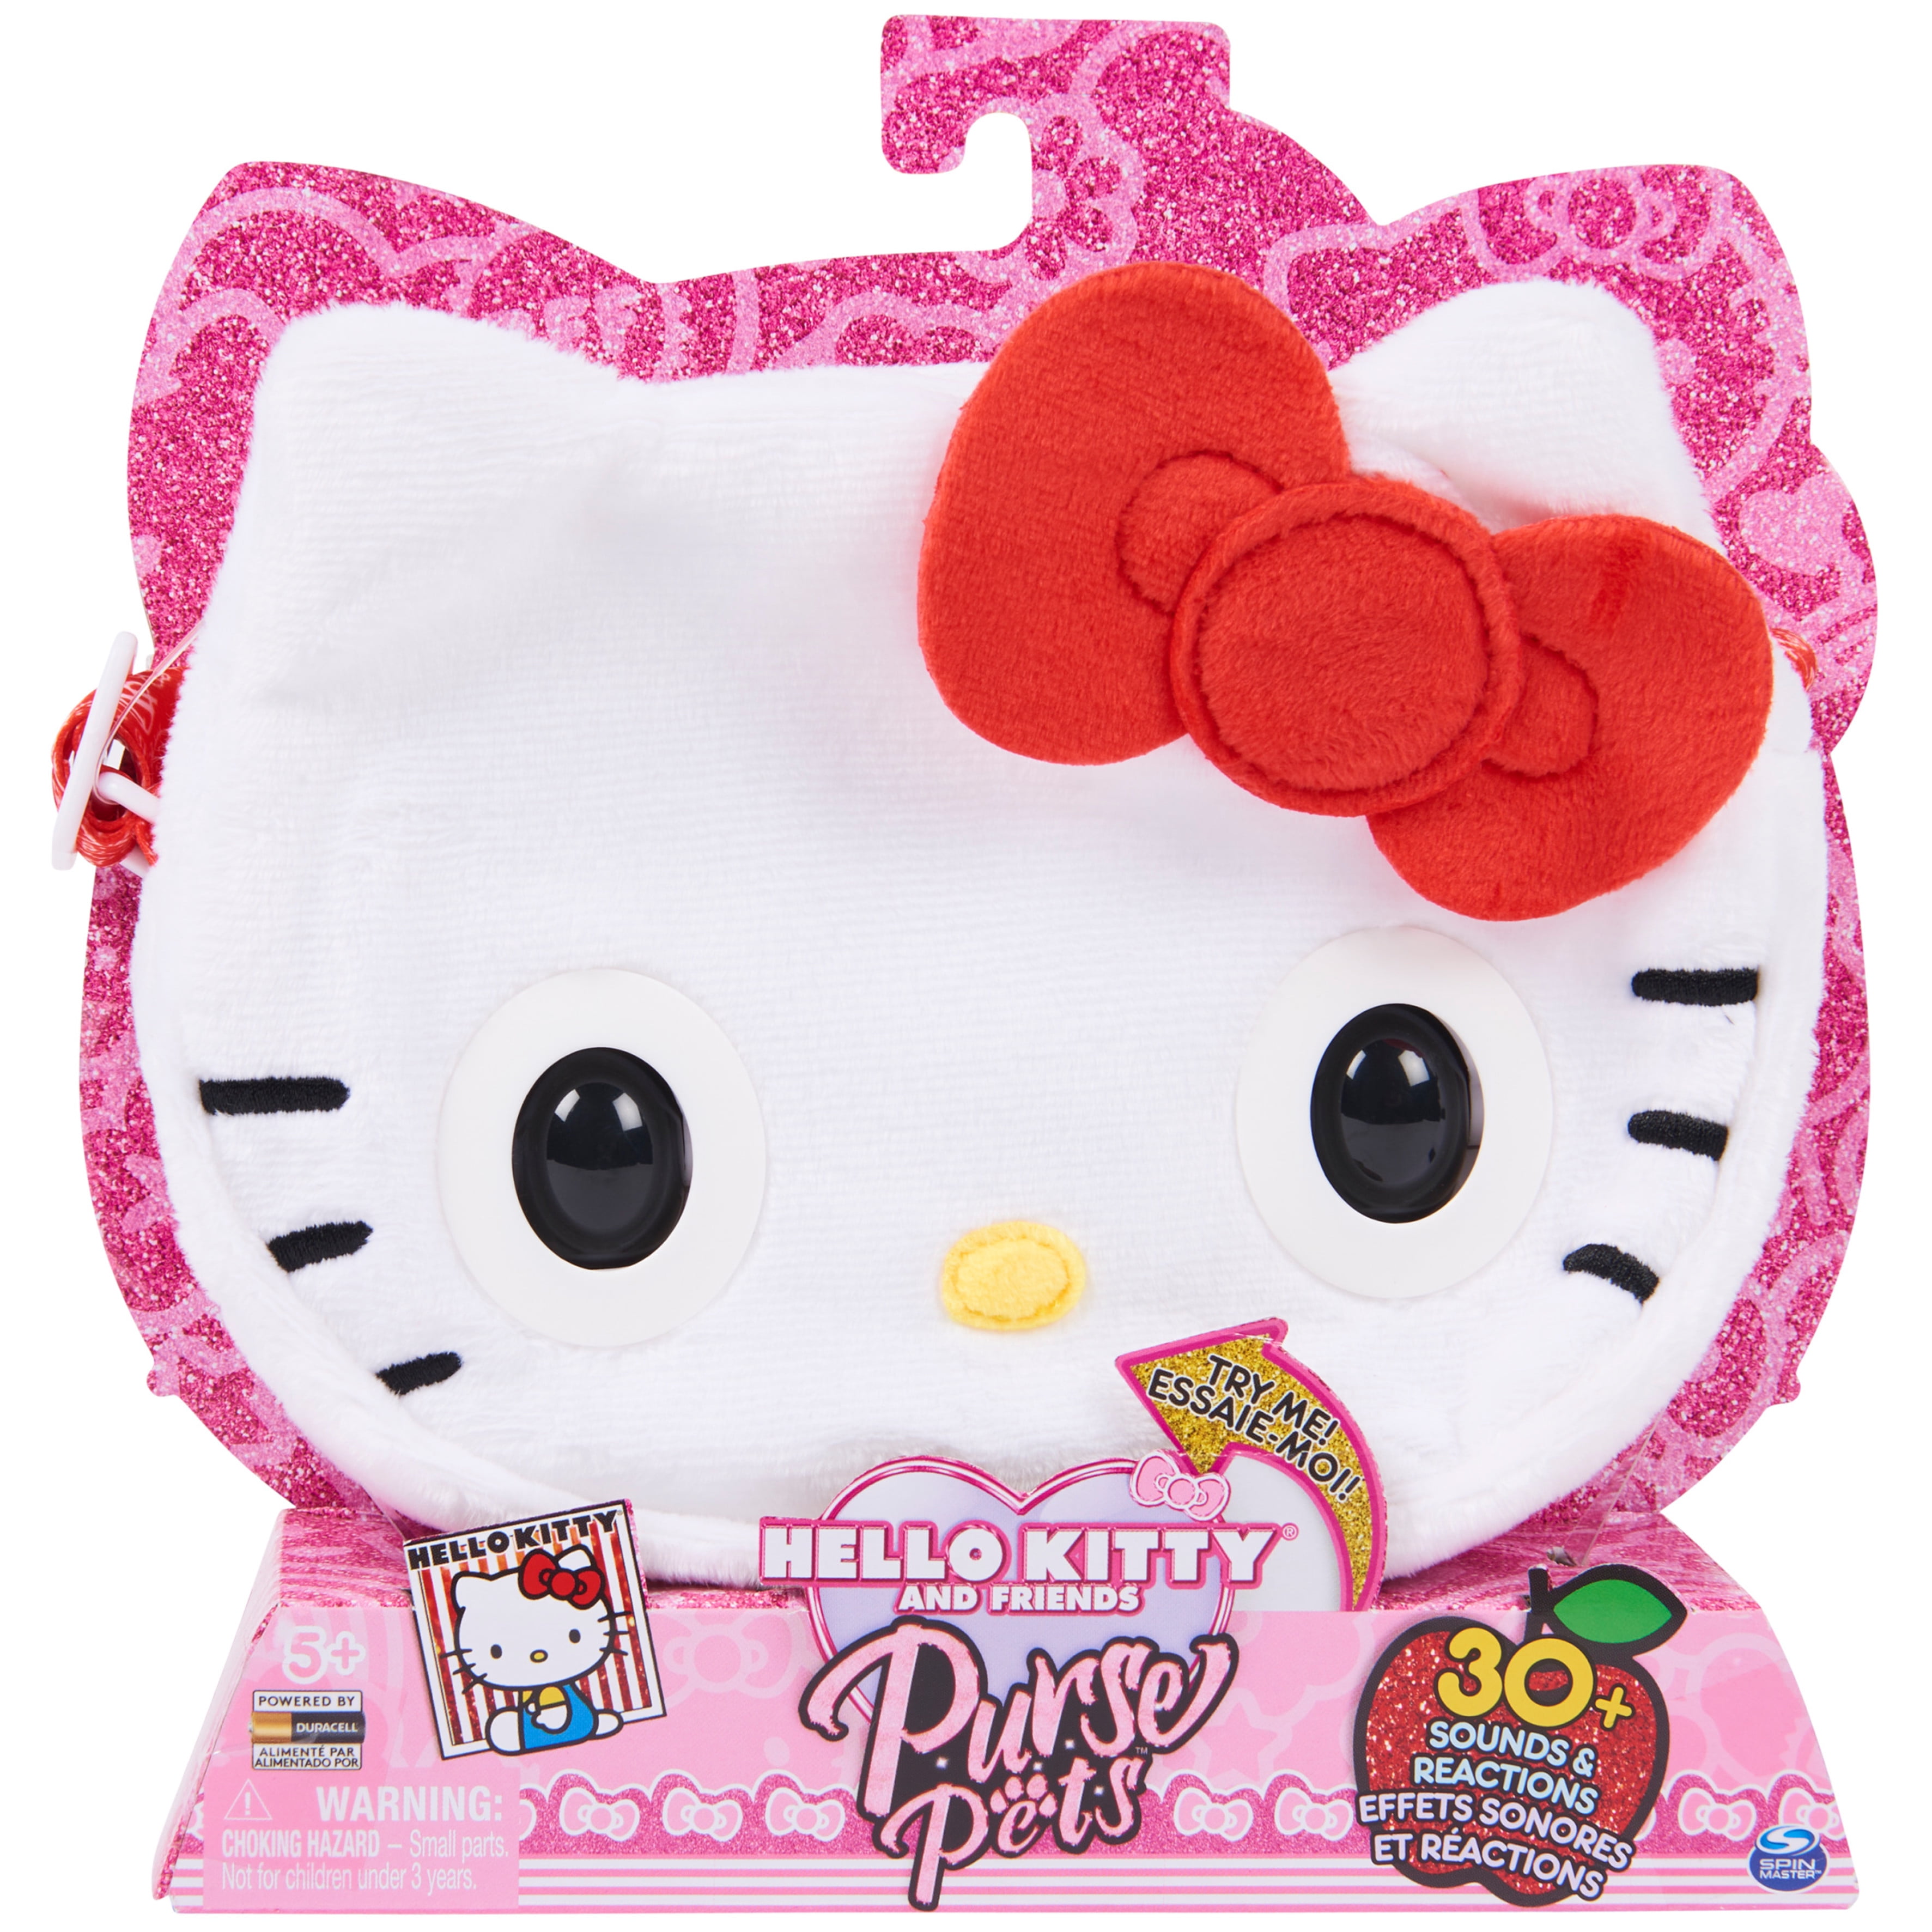 Purse Pets, Hello Kitty with over 30 Sounds and Reactions 